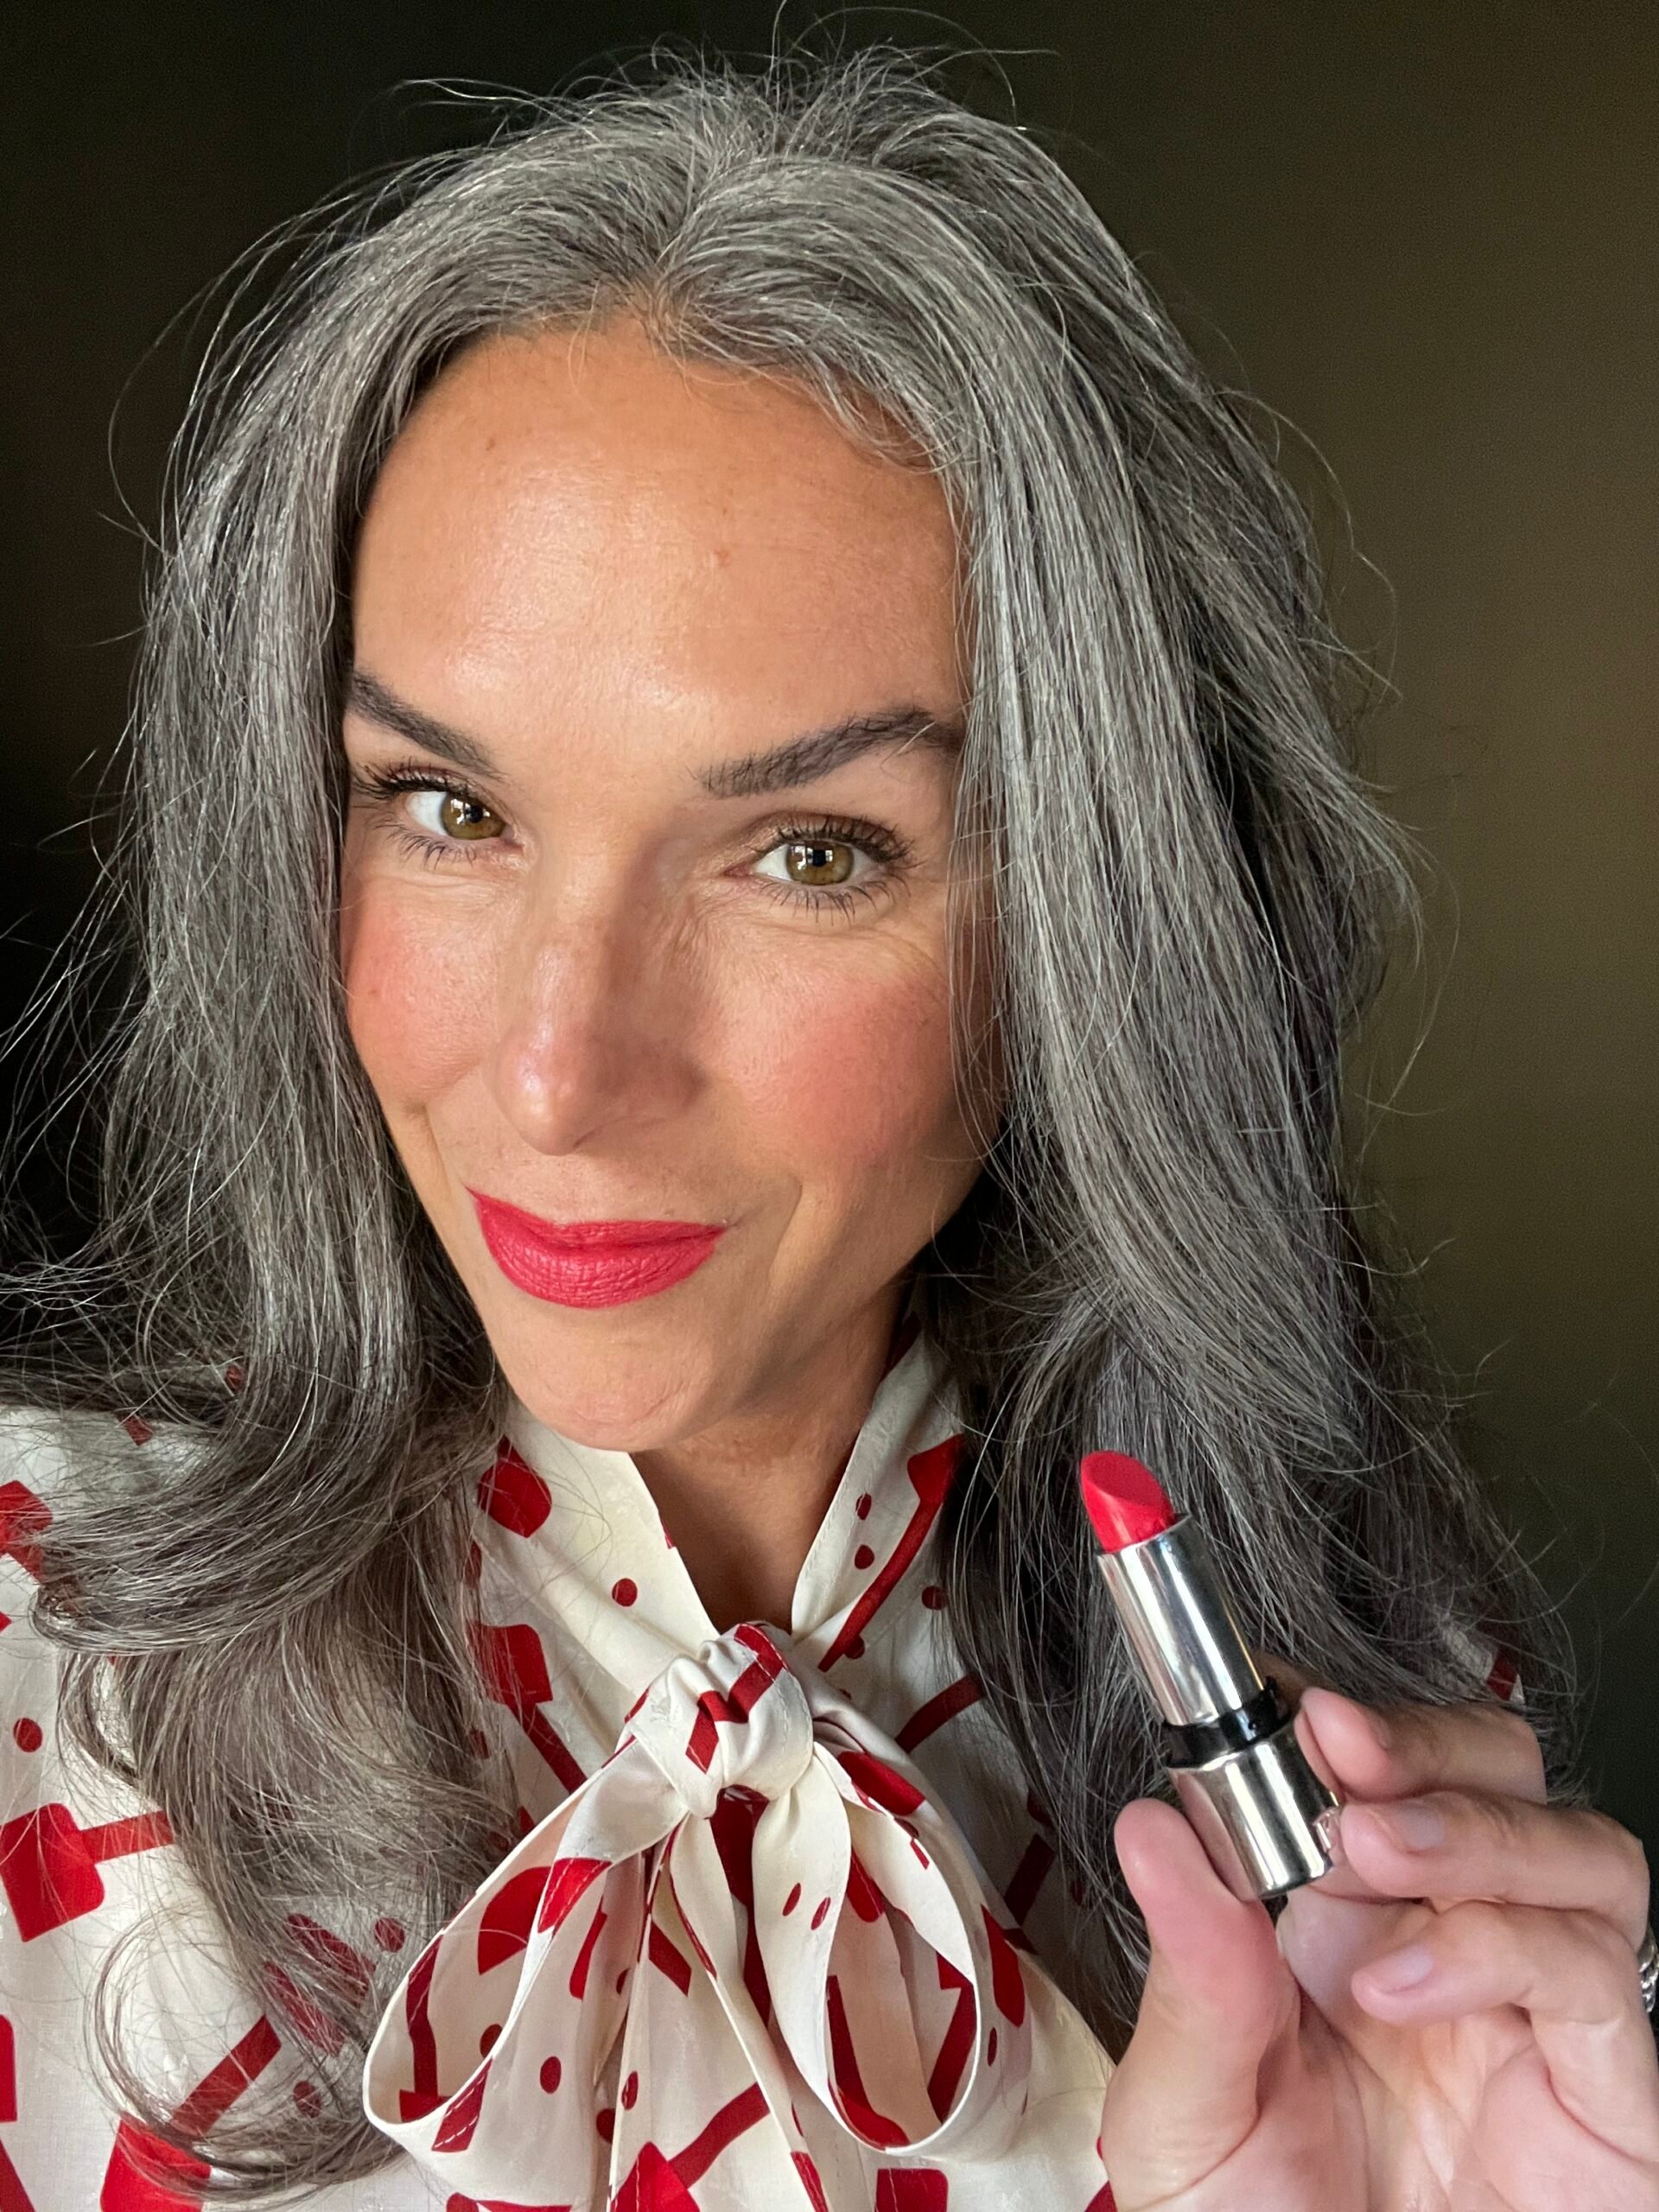 kjaer weis red lipstick applied to woman with gray hair wearing a white and red shirt